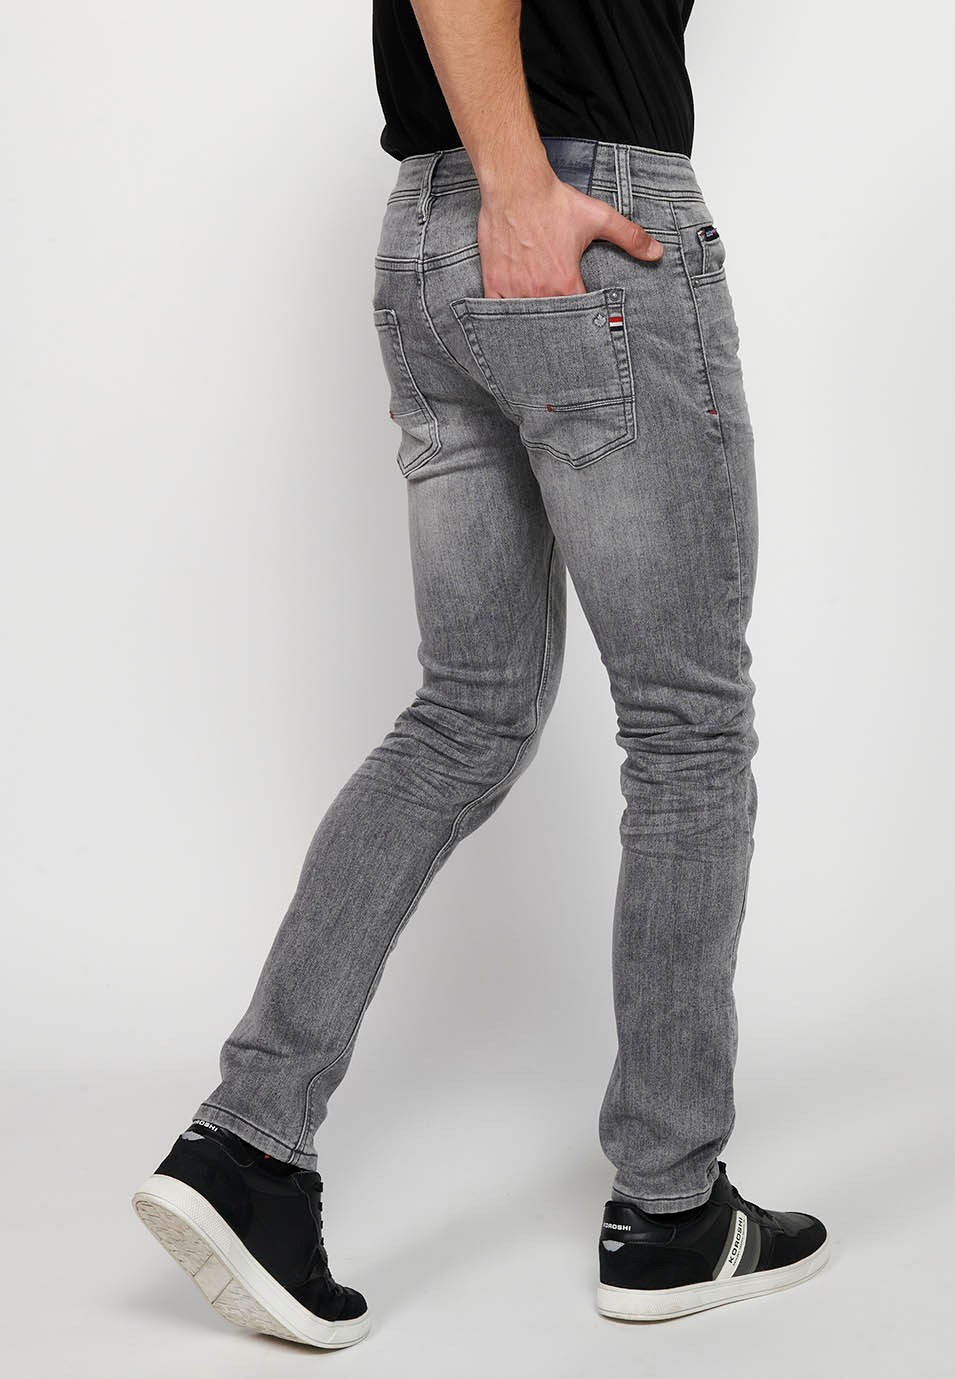 Slim fit denim jeans long trousers with five pockets, one pocket in Gray Denim for Men